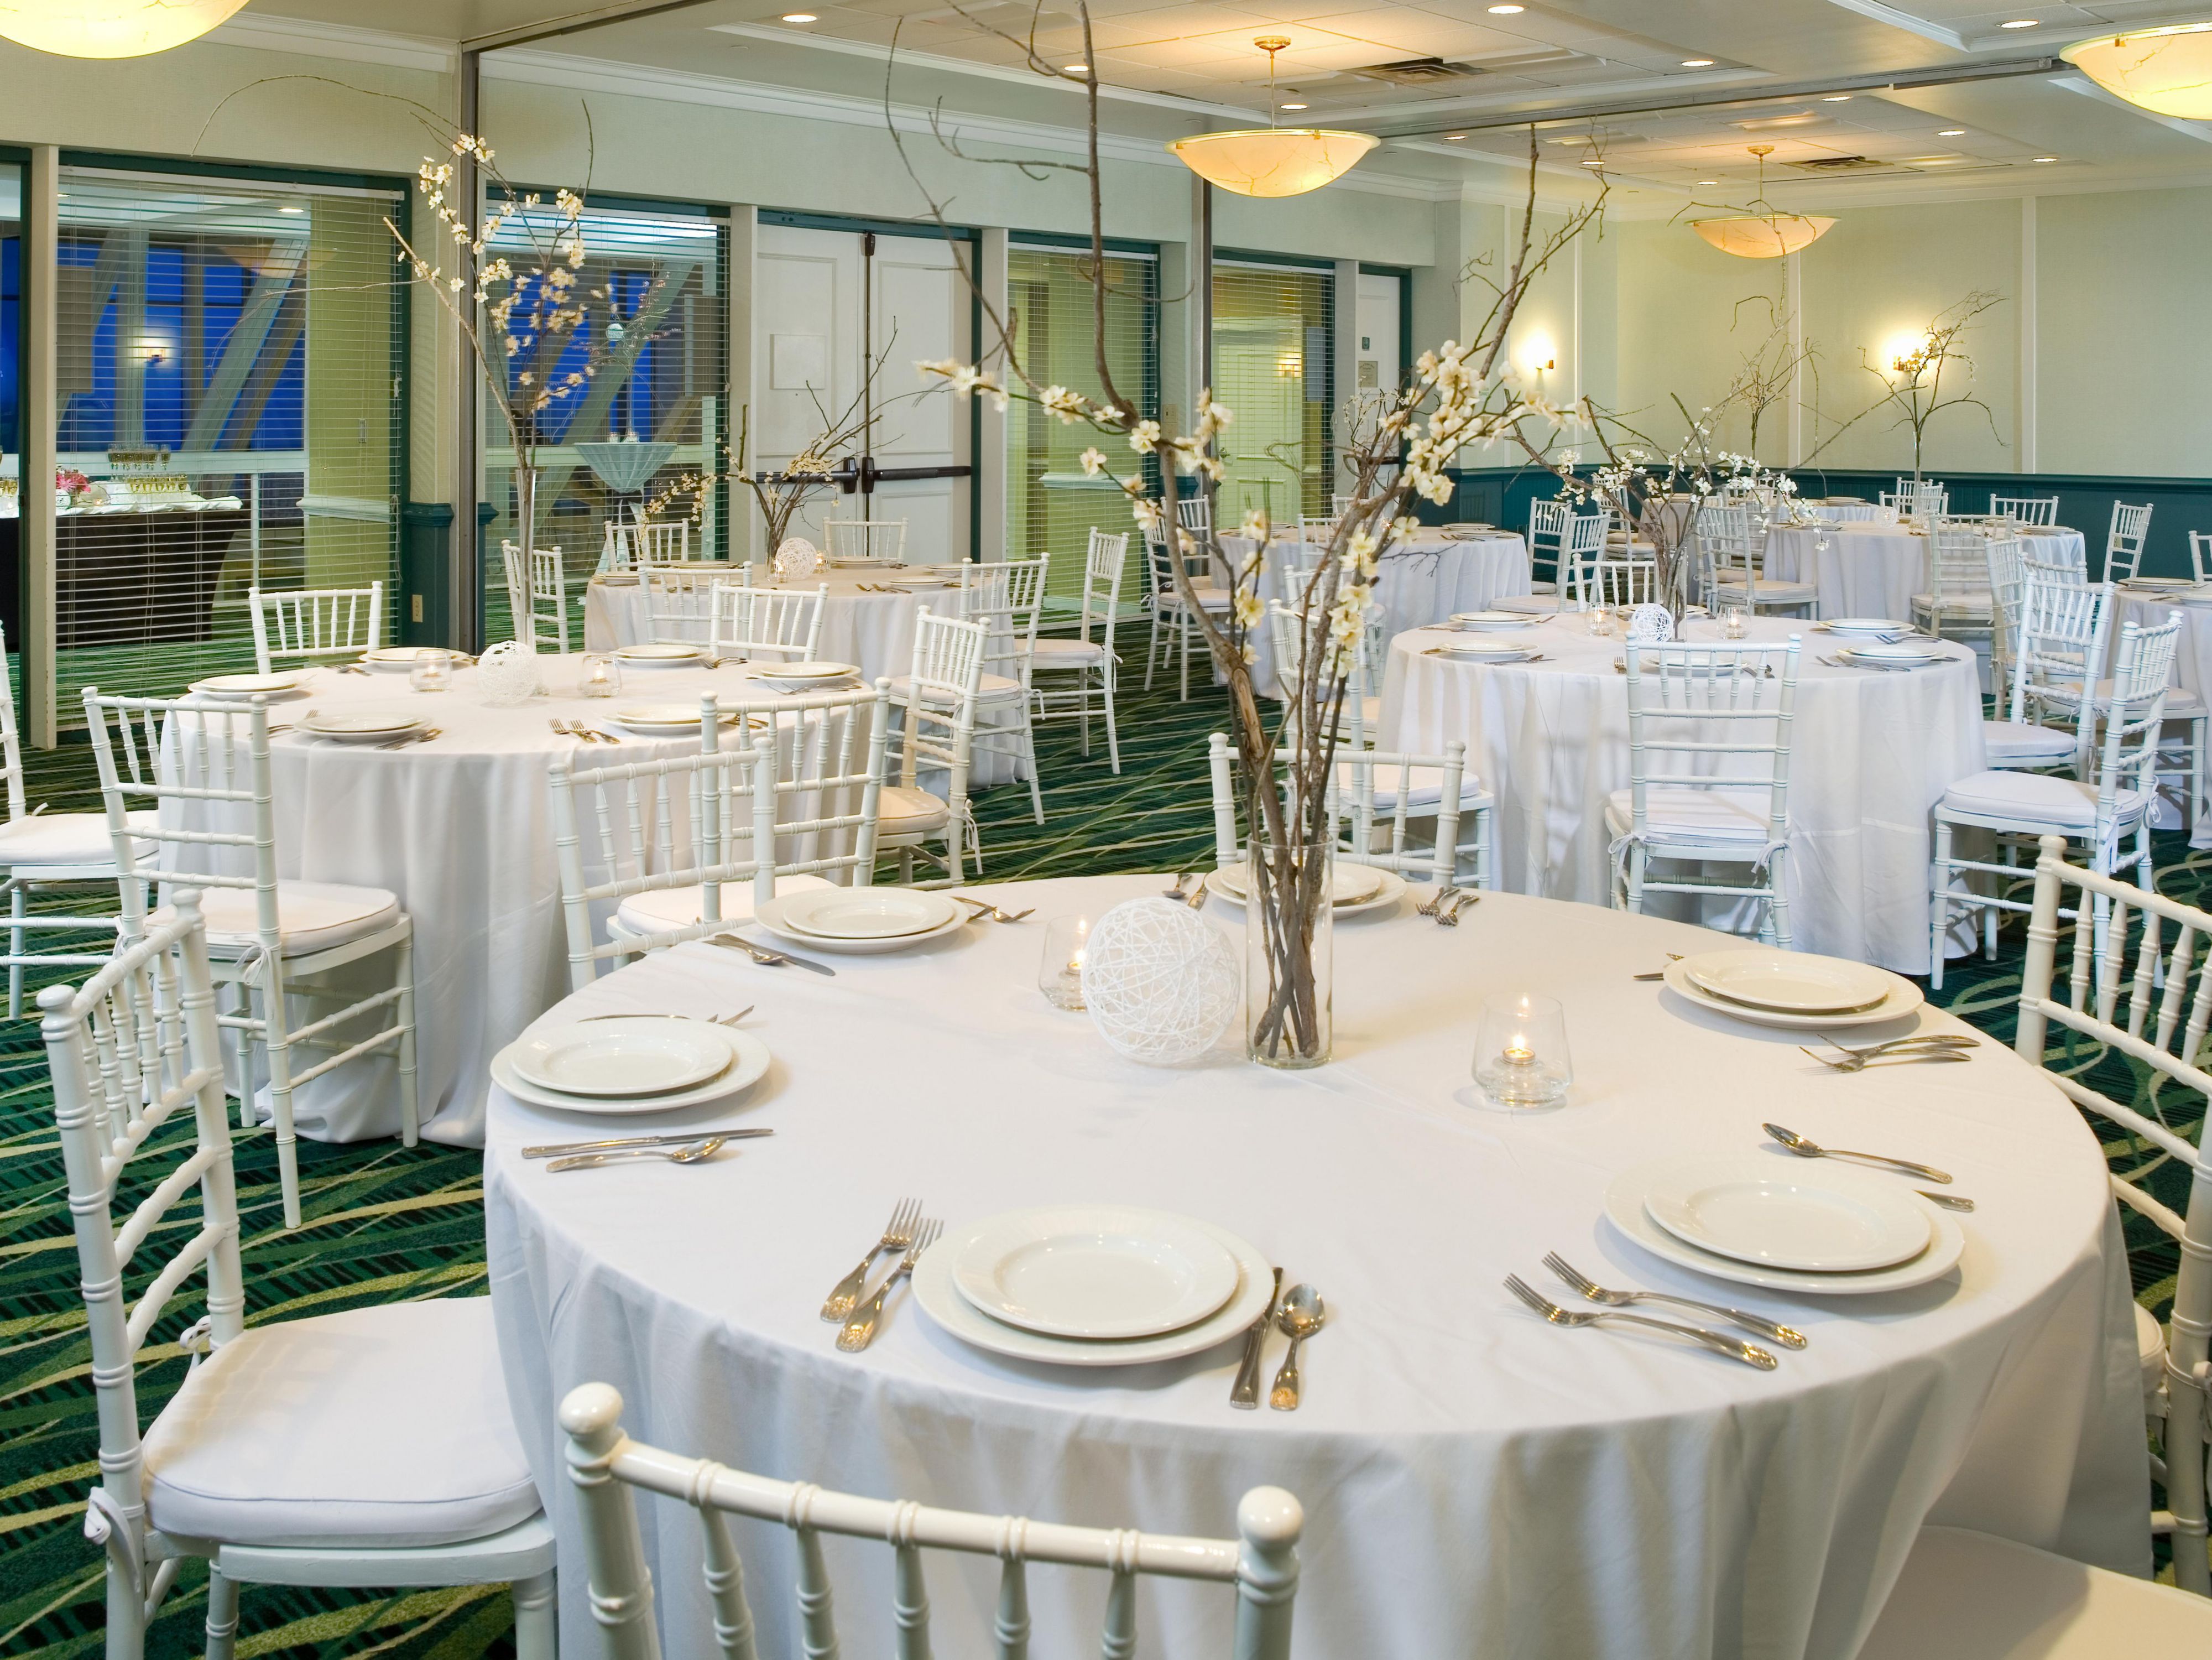 The Holiday Inn Va Beach-Oceanside (21st st
) features over 1,500 square feet of meeting space for productive and memorable business meetings, banquets, wedding receptions, social events or private parties. Wedding packages at our beachfront hotel can be customized for up to 100 people to make your dreams come true. Begin your ever after with us!